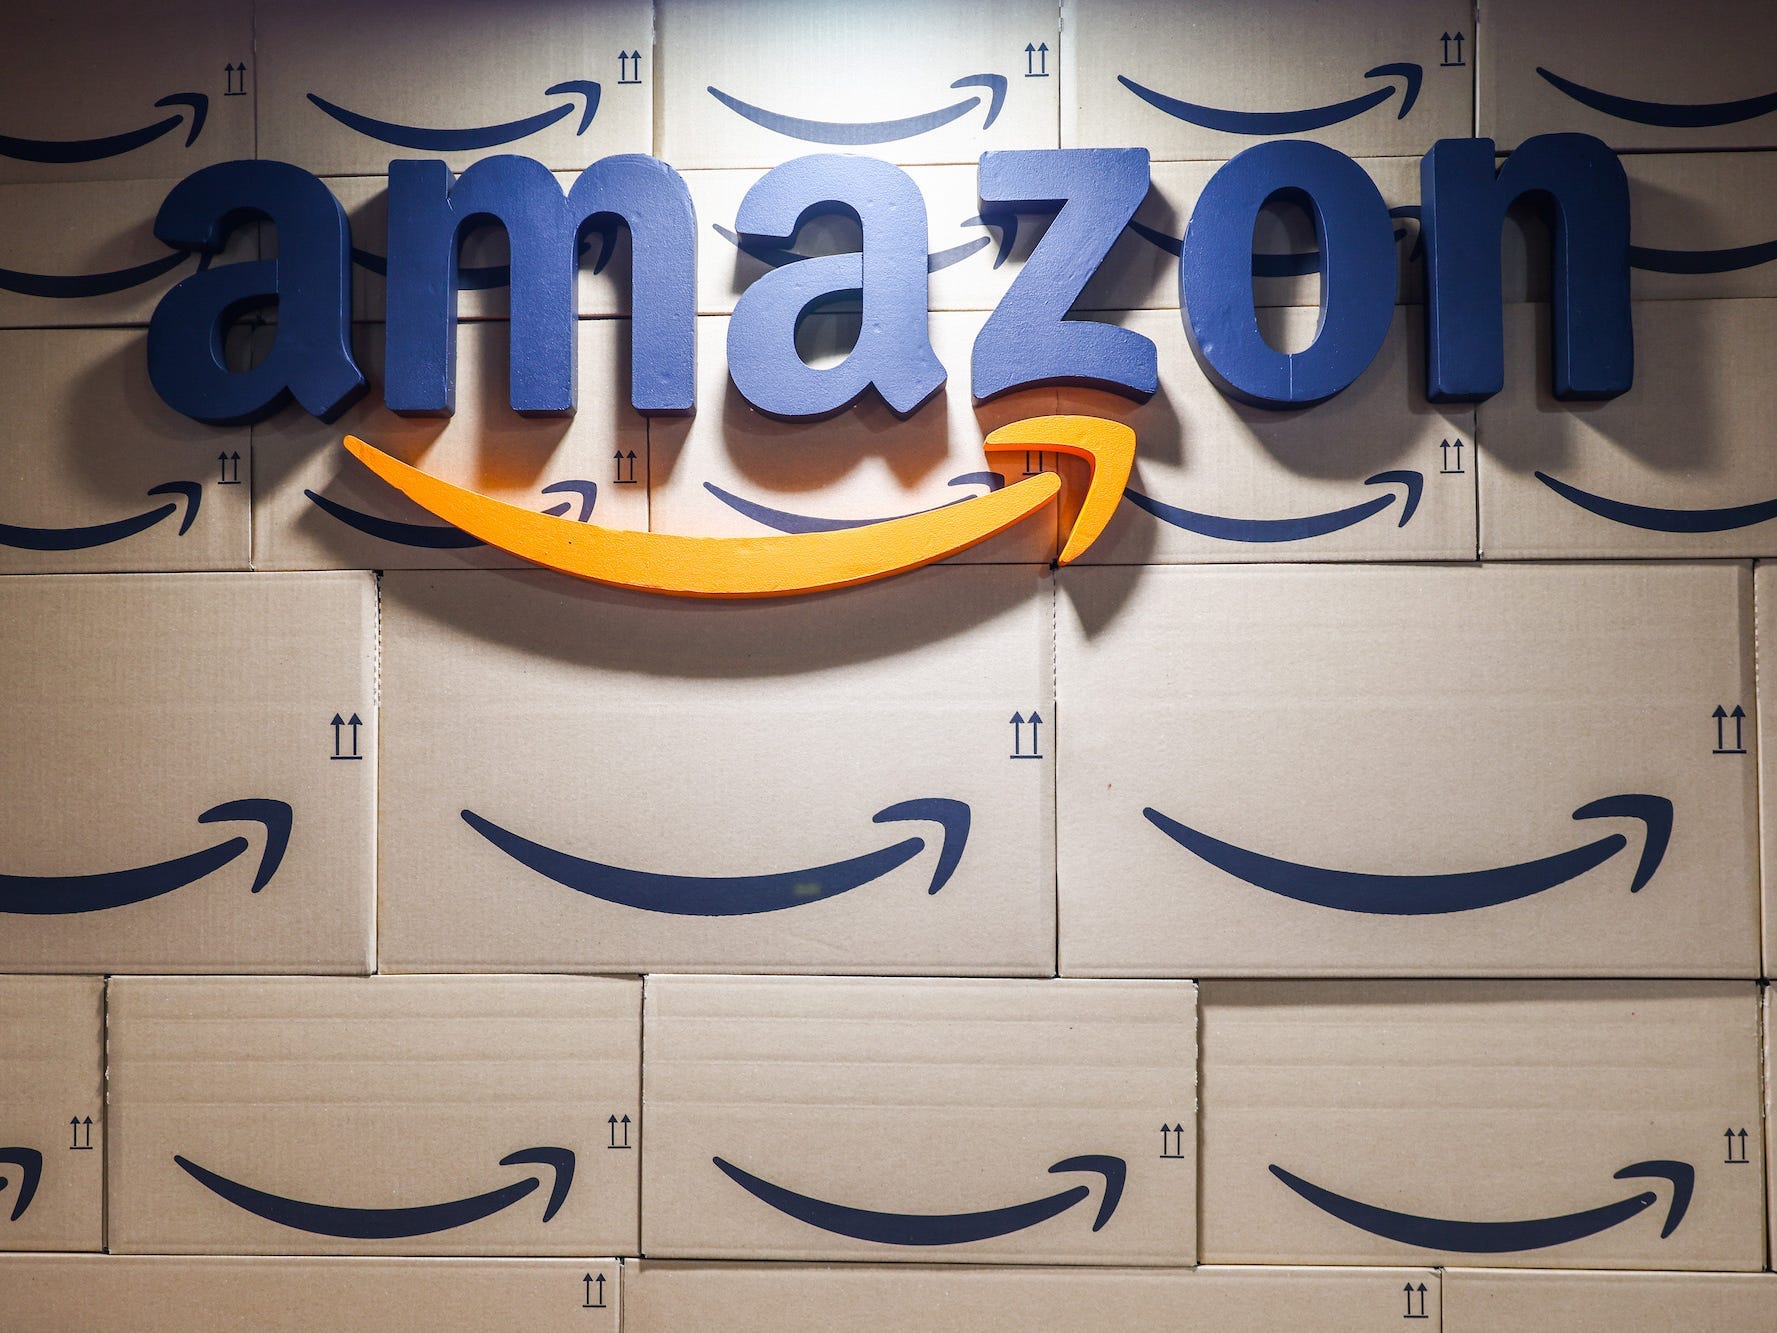 <p>Amazon Games is cutting just over 180 roles, according to a memo sent to employees on Monday.</p><p>As part of the changes, the gaming division is closing its Crown Channel and Game Growth initiatives and refocusing on Prime Gaming.</p><p>"After our initial restructuring in April, it became clear that we needed to focus our resources even more on the areas that are growing with the highest potential to drive our business forward," Hartmann wrote in the memo, which was shared with Insider.</p><p>Amazon announced on March 20 that it would cut 9,000 jobs from its workforce over the coming weeks. The cuts came on the heels of the 18,000 roles the company announced it was cutting back in January. </p><p>In a <a href="https://www.aboutamazon.com/news/company-news/update-from-ceo-andy-jassy-on-amazons-operating-plan-and-additional-role-eliminations" rel="noopener">message to employees</a> shared on Amazon's site, CEO Andy Jassy noted that the impacted positions are largely in the Amazon Web Services, People Experience and Technology Solutions, Advertising, and Twitch departments. </p>